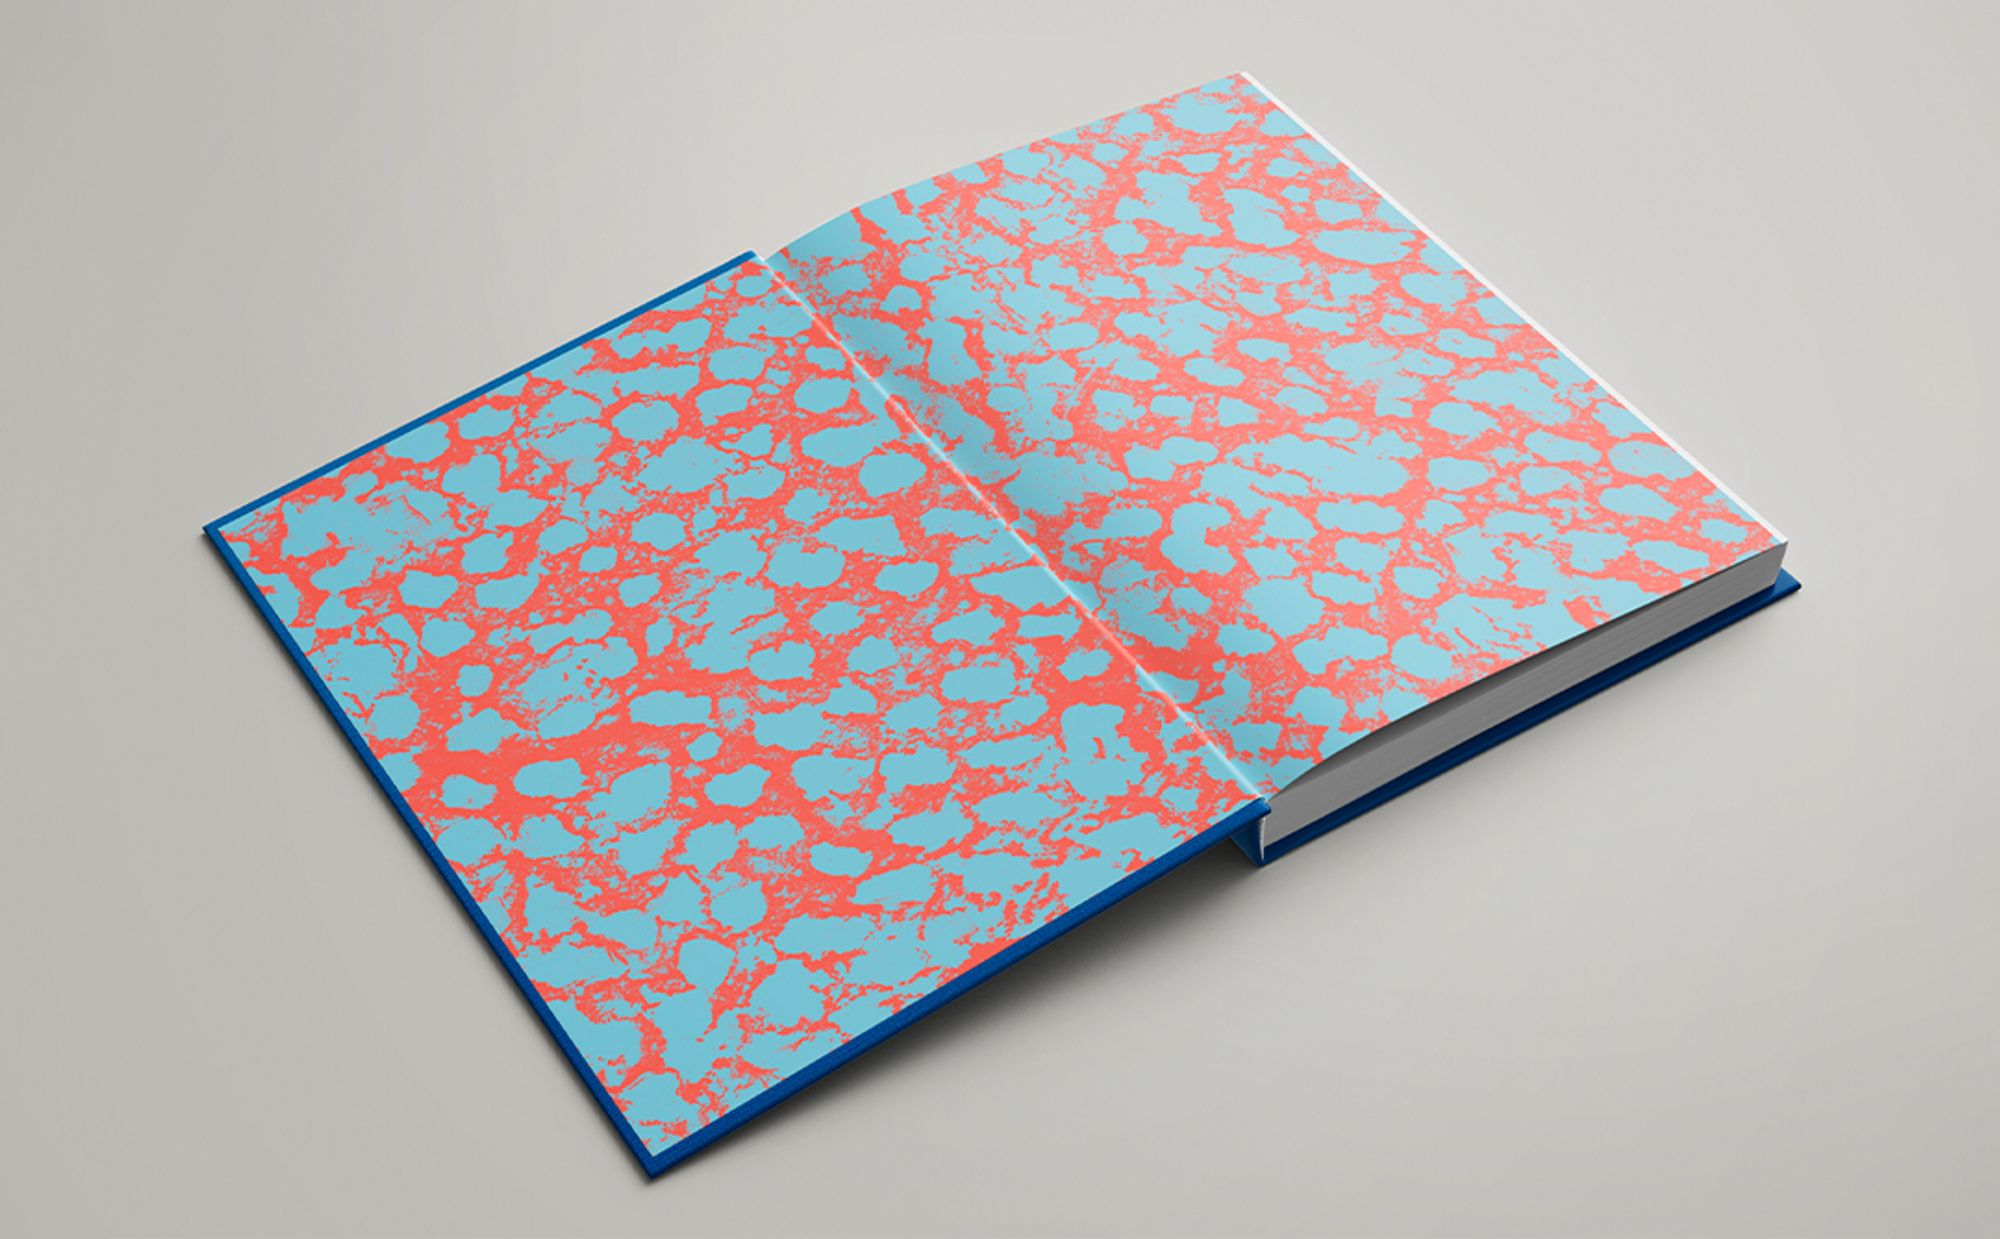 CREATIVE DIRECTION – ENDPAPERS WITH VOLCANIC PATTERN FROM NAPLES STREETS